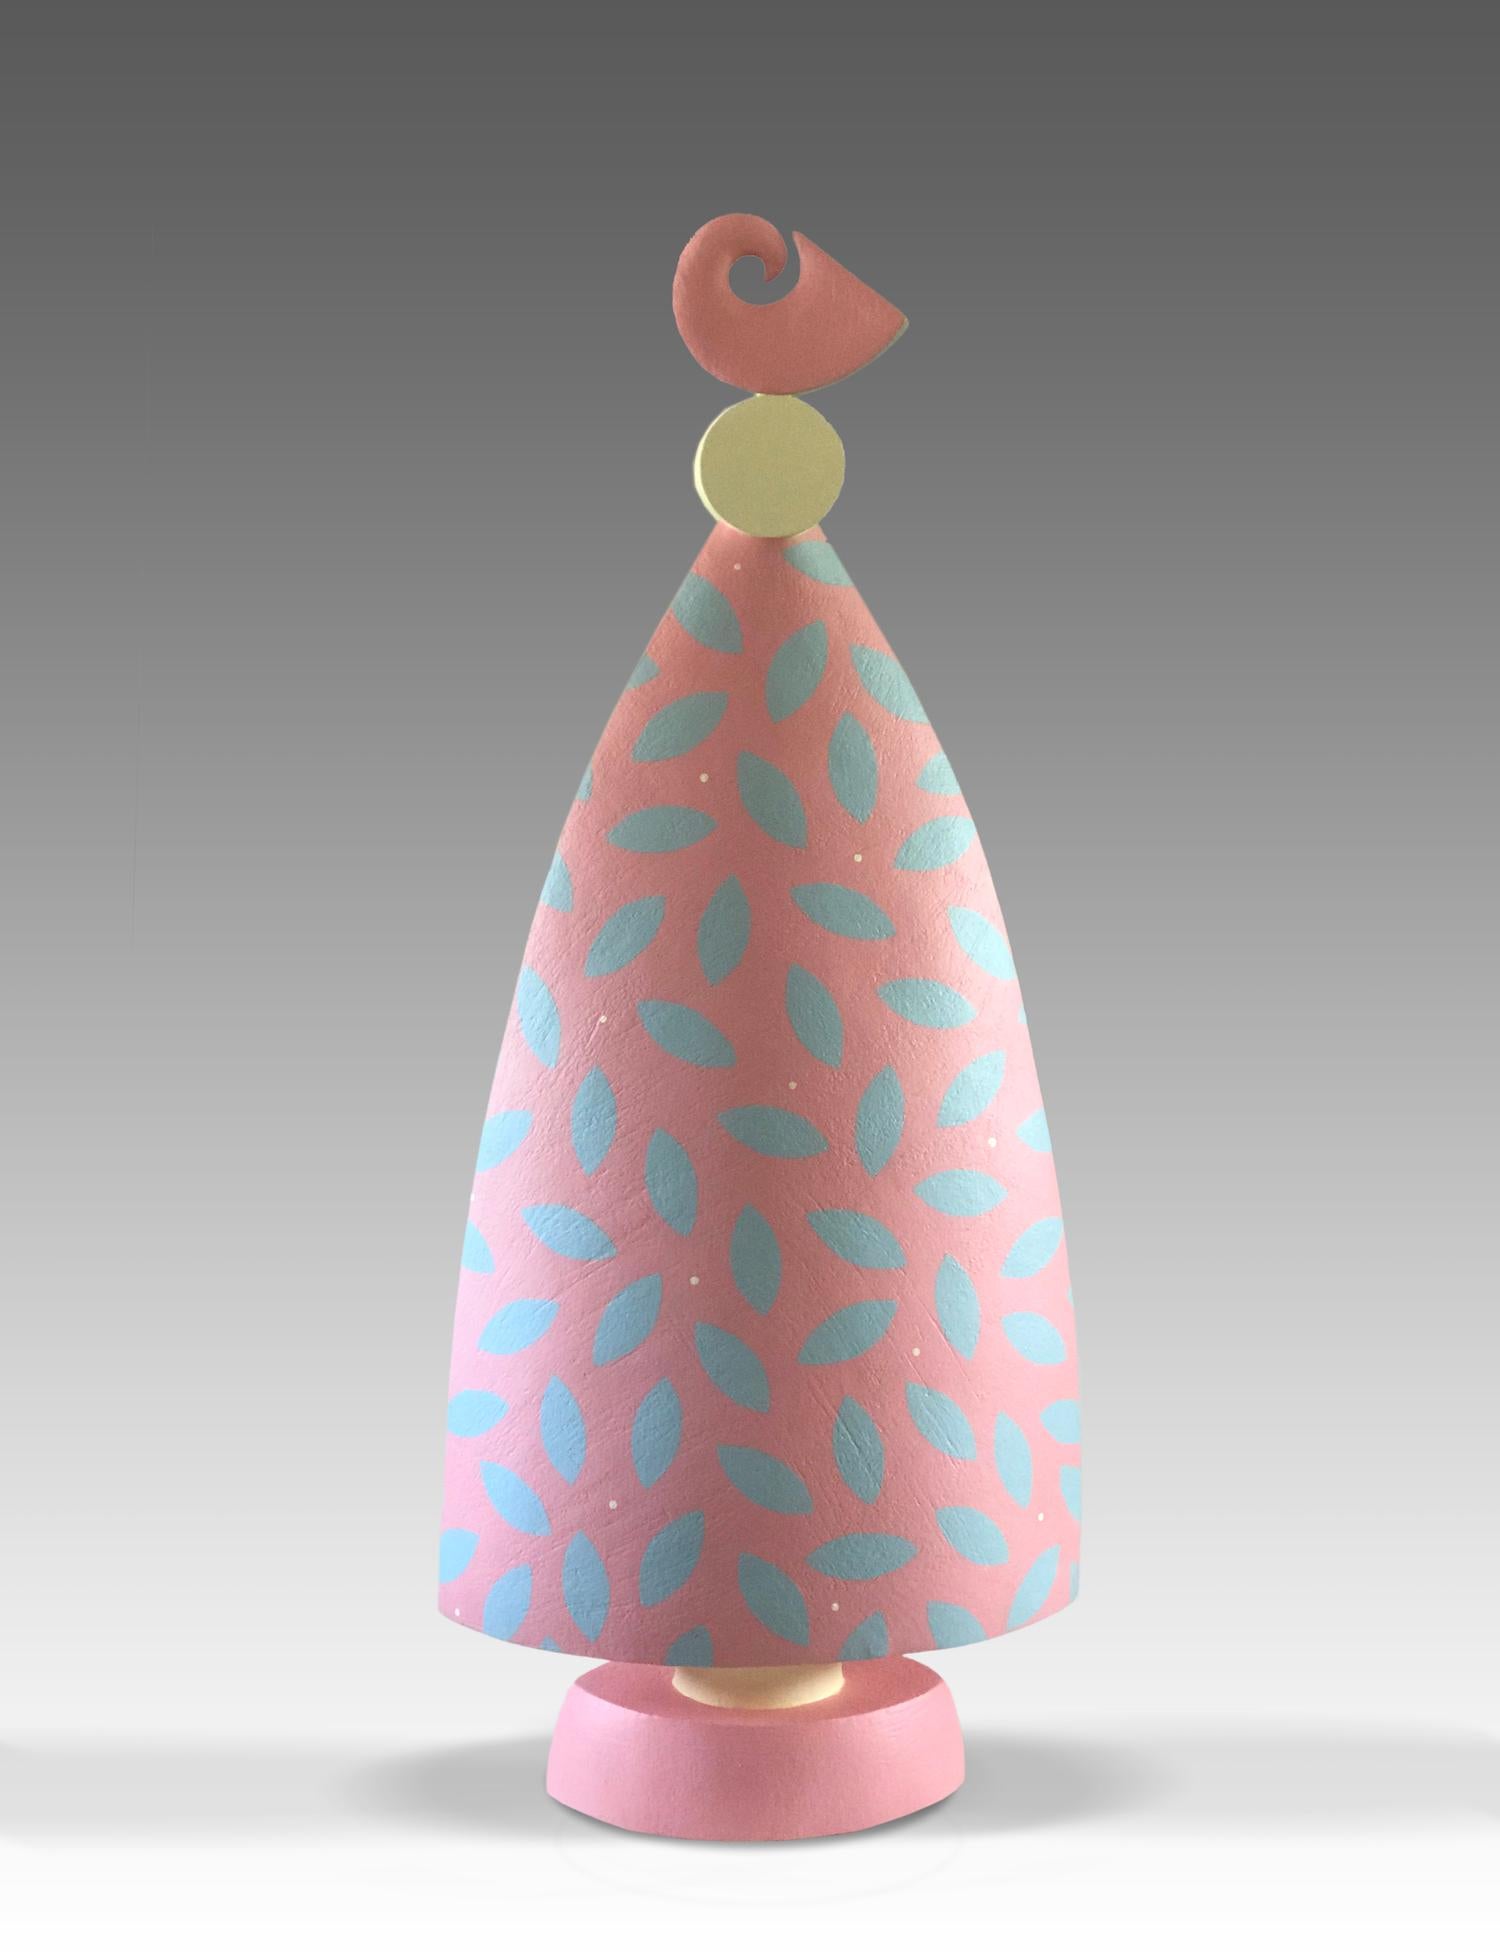 Bloom is a unique painted fired clay sculpture by contemporary artist Patricia Volk, dimensions are 100 cm × 45 cm × 24 cm (39.4 × 17.7 × 9.4 in). The sculpture is signed and comes with a certificate of authenticity. The sculpture is suitable to be